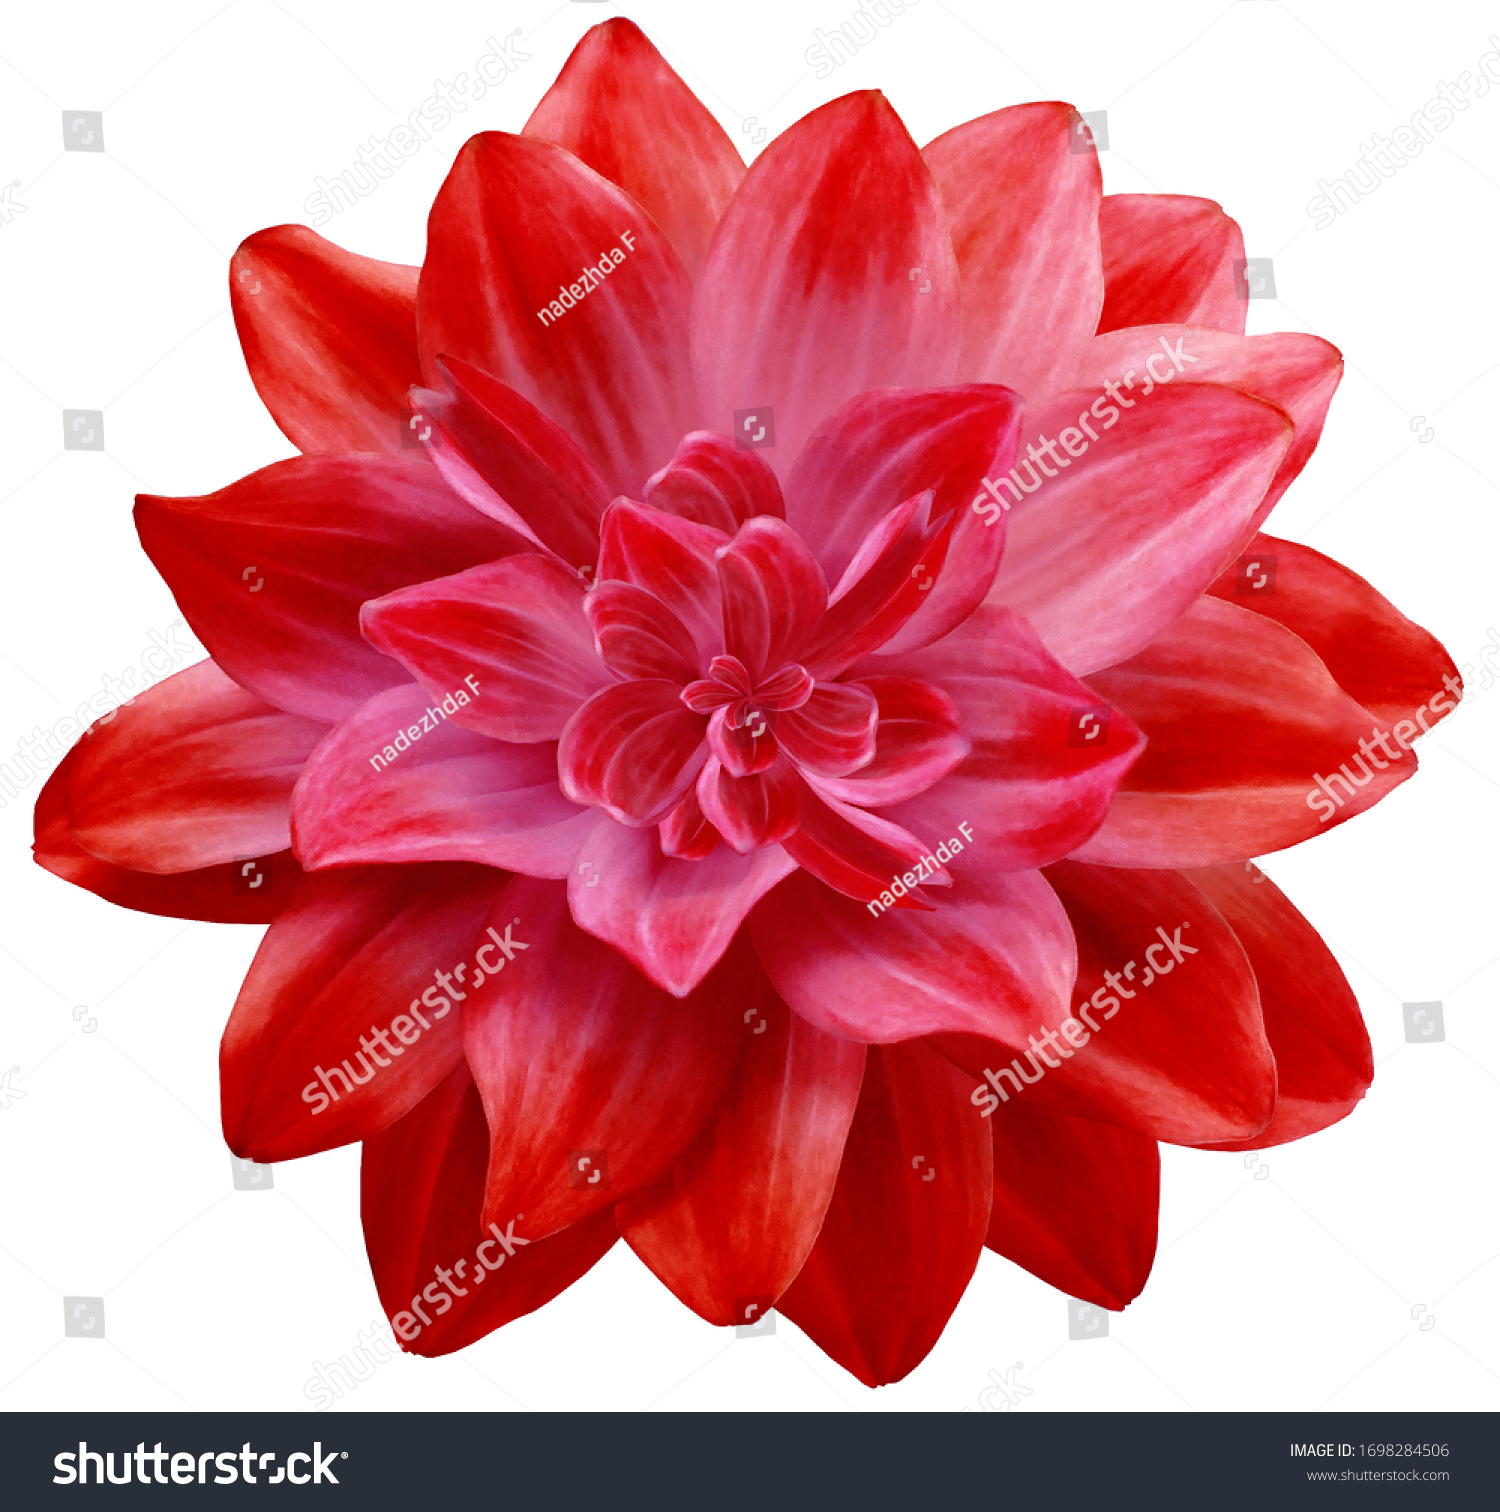  dahlia flower red. Flower isolated on a white background. No shadows with clipping path. Close-up. Nature. #1698284506